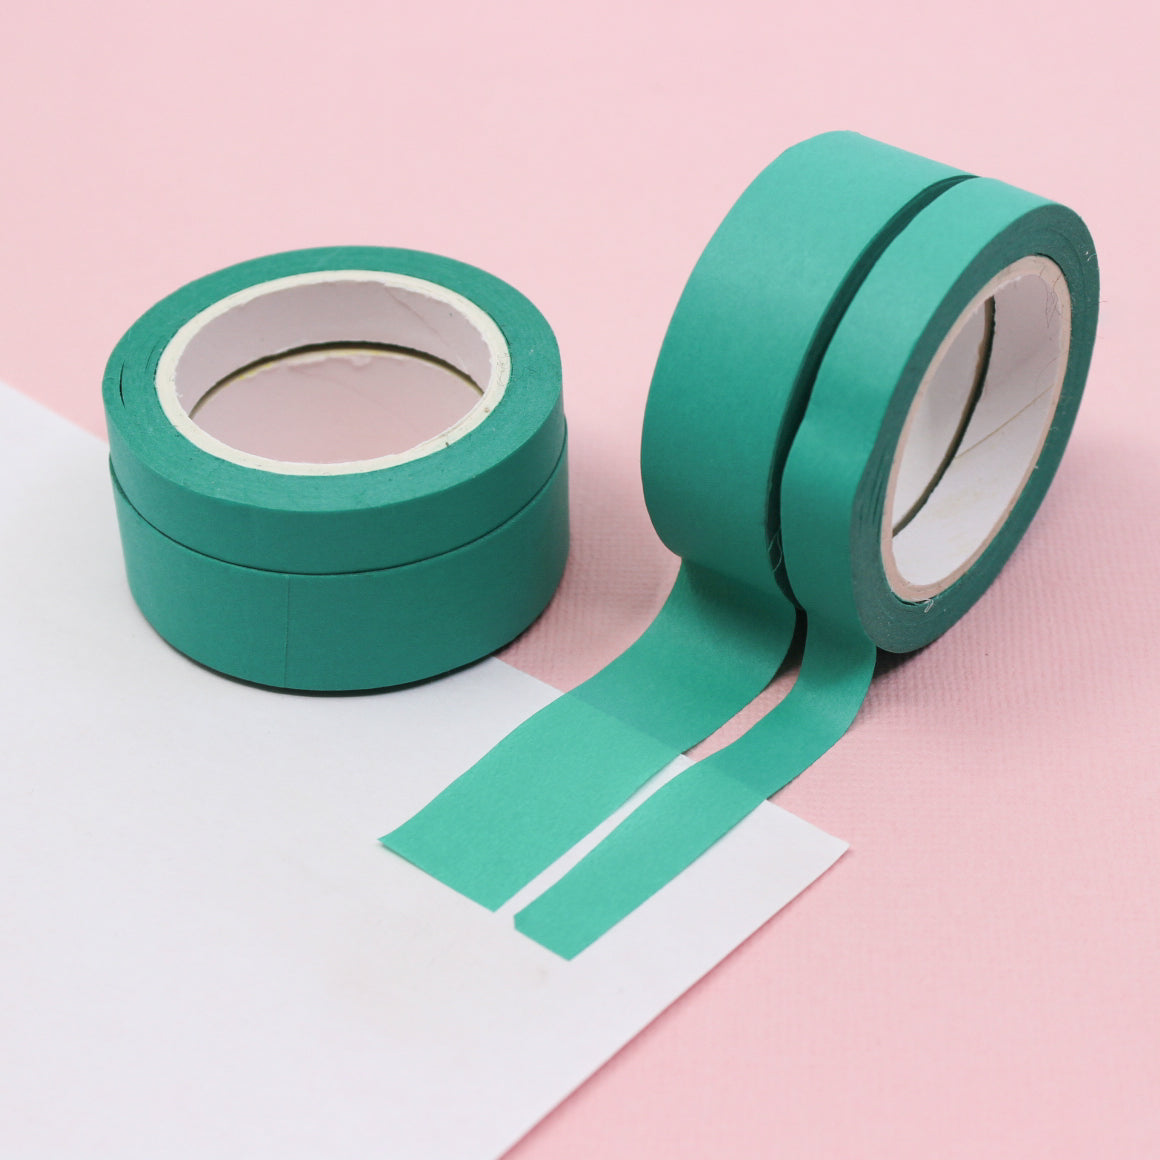 This pastel turquoise blue washi tape is vibrant and fun. This washi tape is part of our solid neon thick-thin matching duo washi collection. Find the perfect color for any project in BBB Supplies' thick-thin solids collection, from neon to neutral to pastel and more. This tape is sold at BBB Supplies Craft Shop.